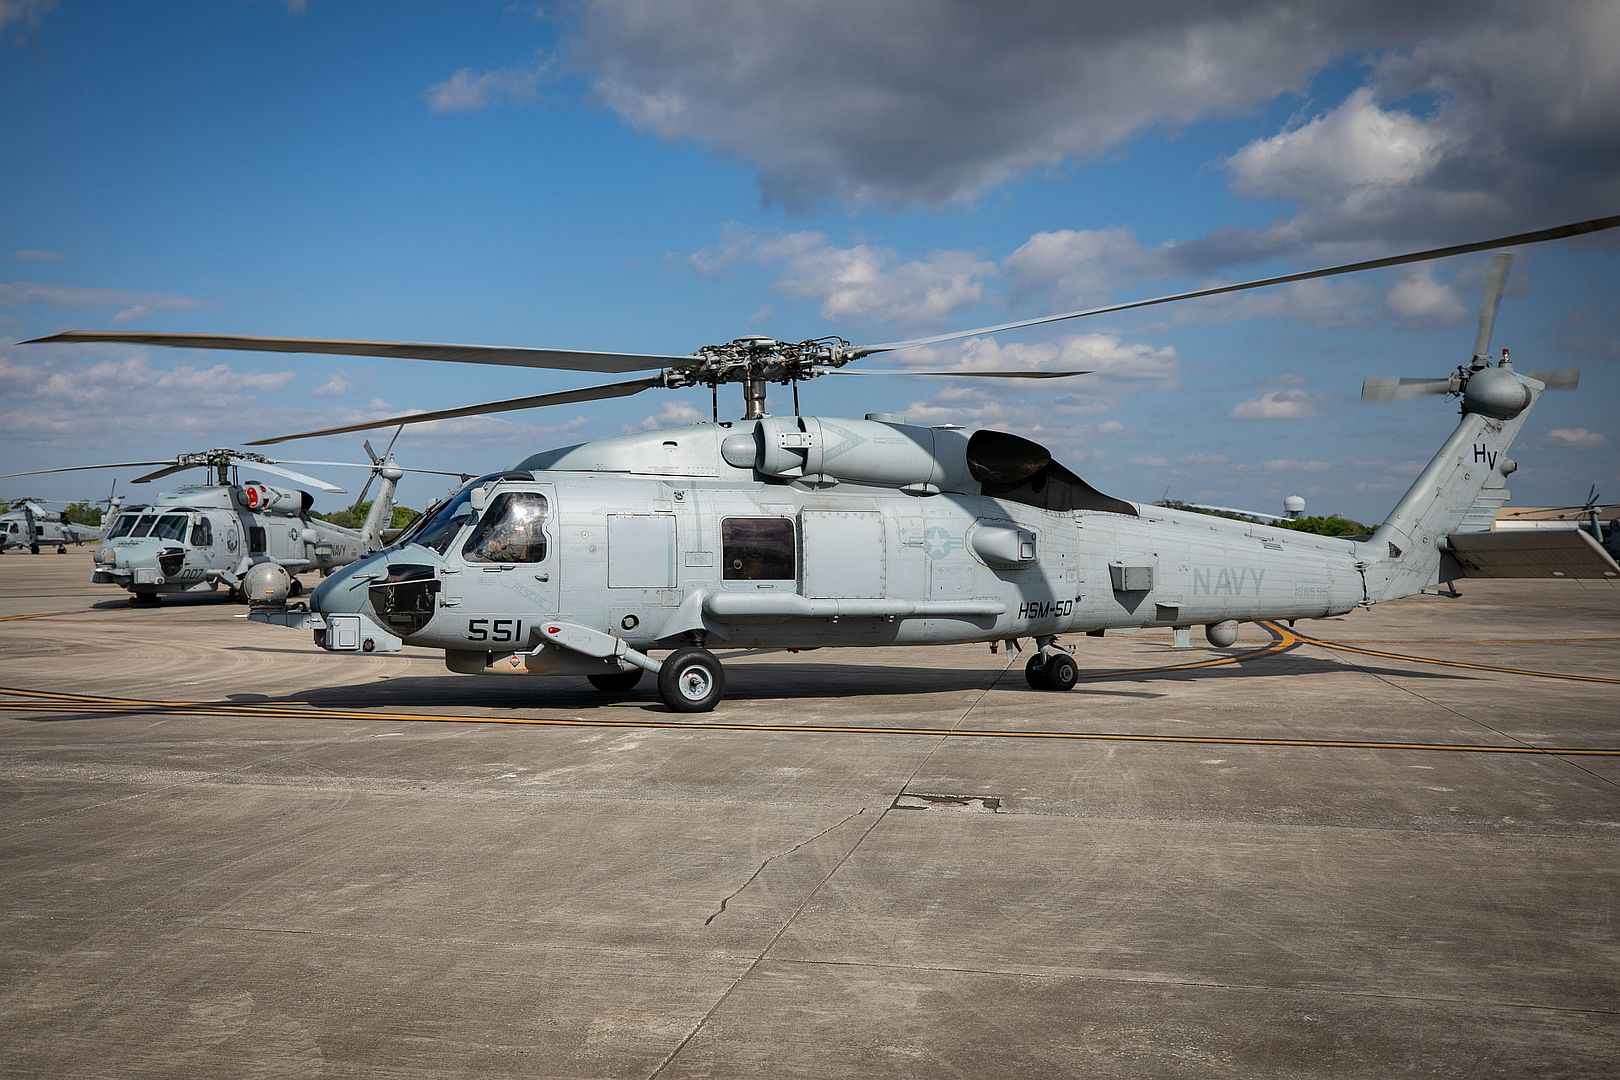 60R Helicopter Assigned To The Valkyries Of Helicopter Maritime Strike Squadron HSM 50